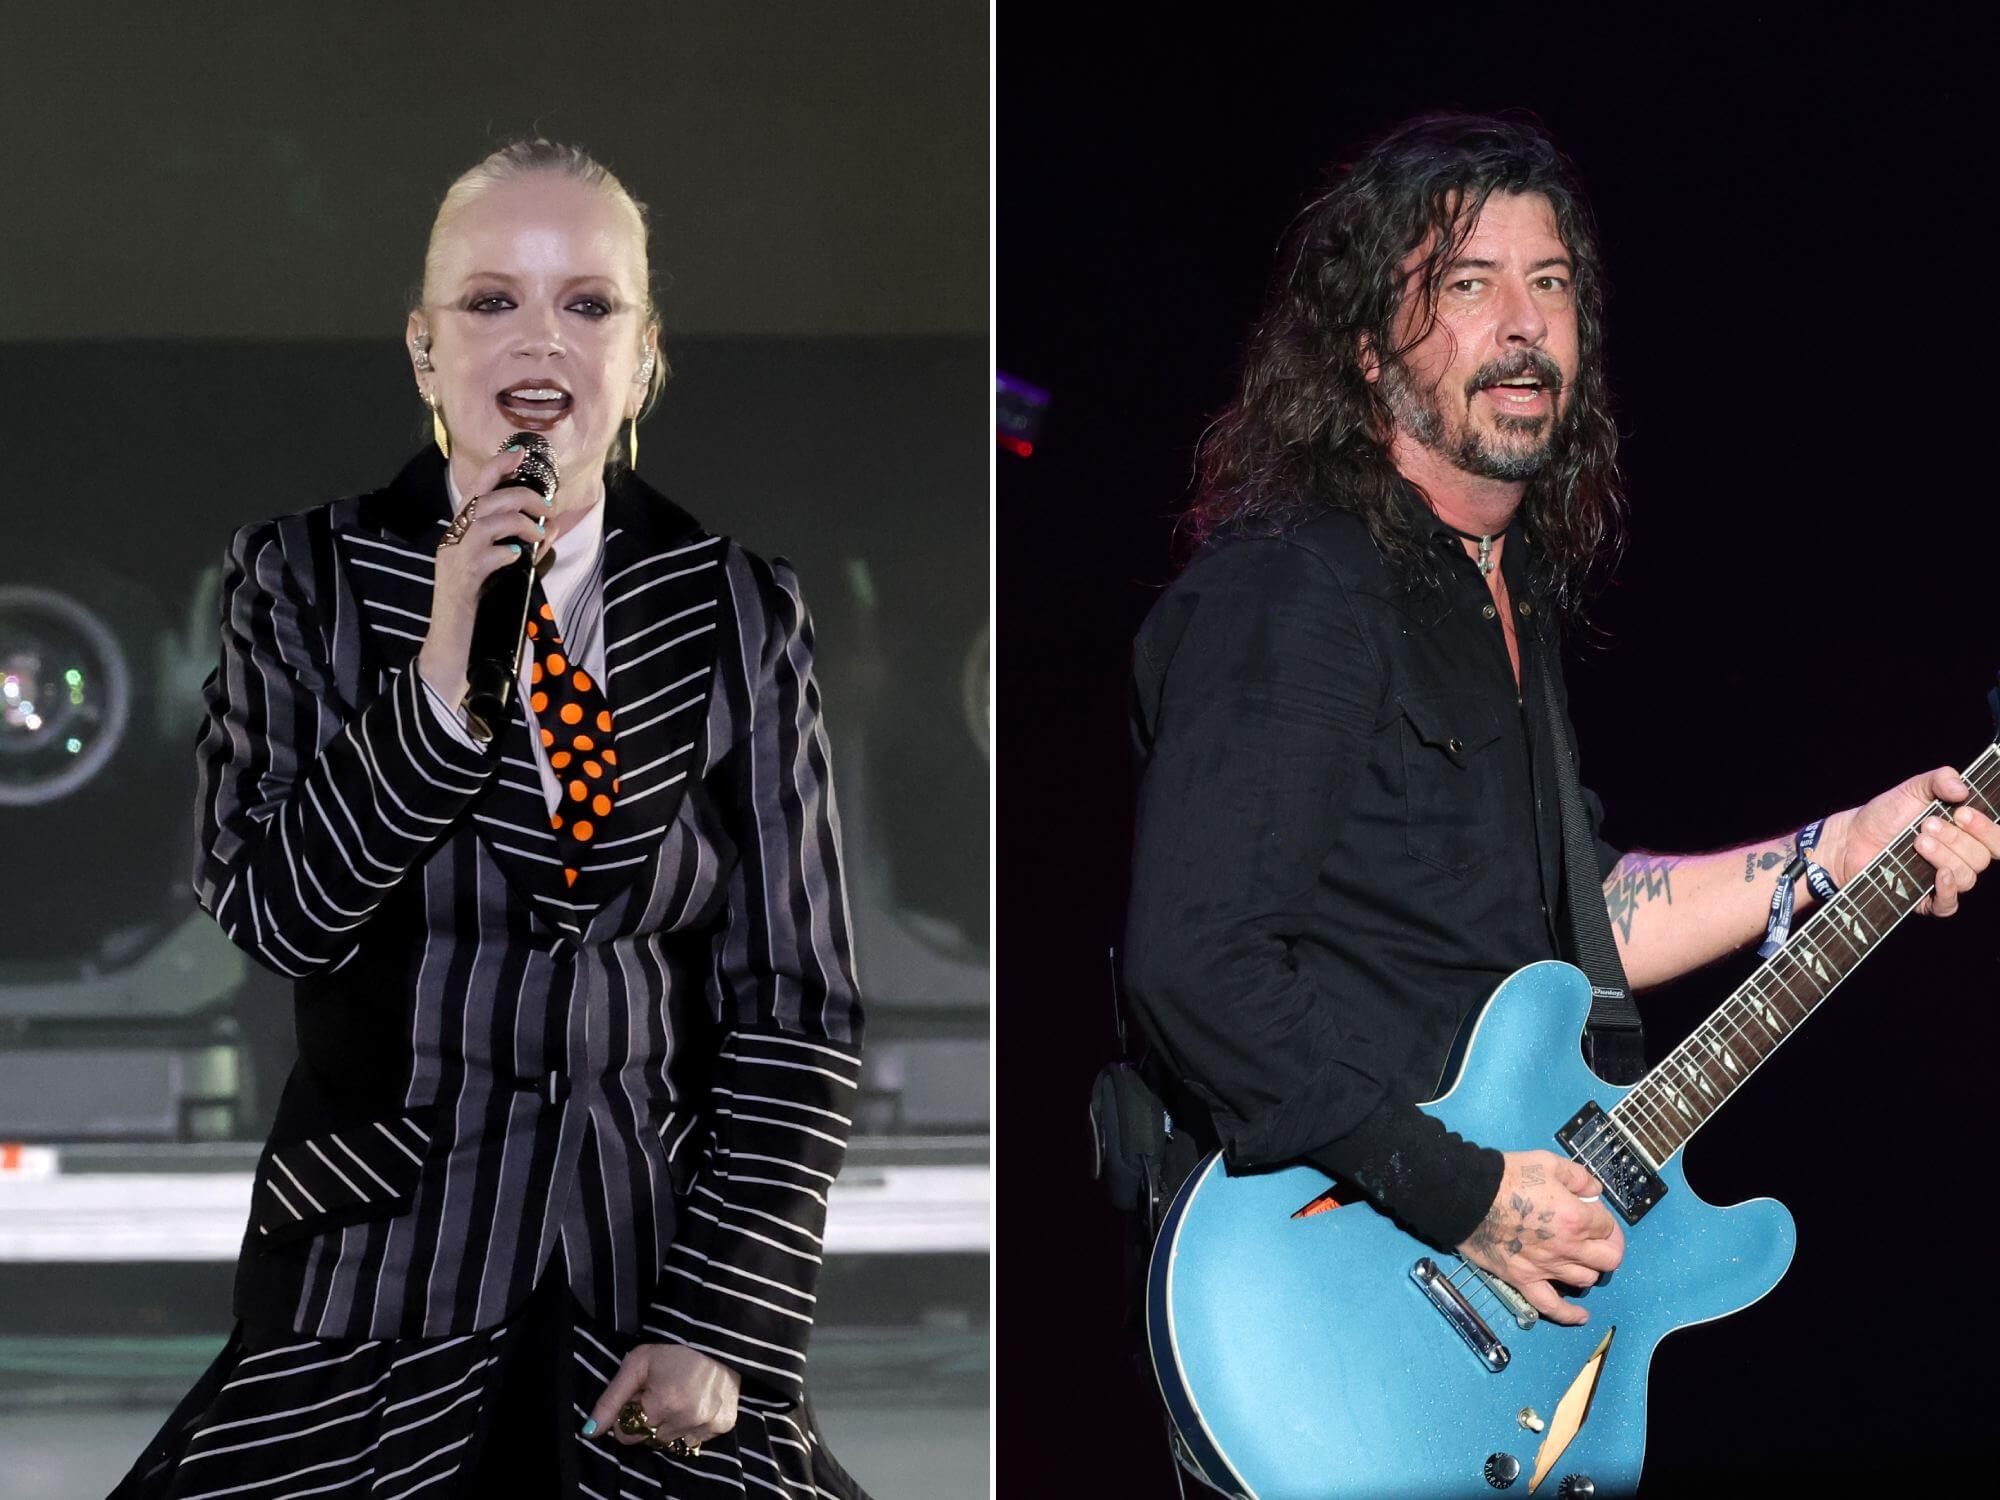 Shirley Manson of Garbage and Foo Fighters' Dave Grohl